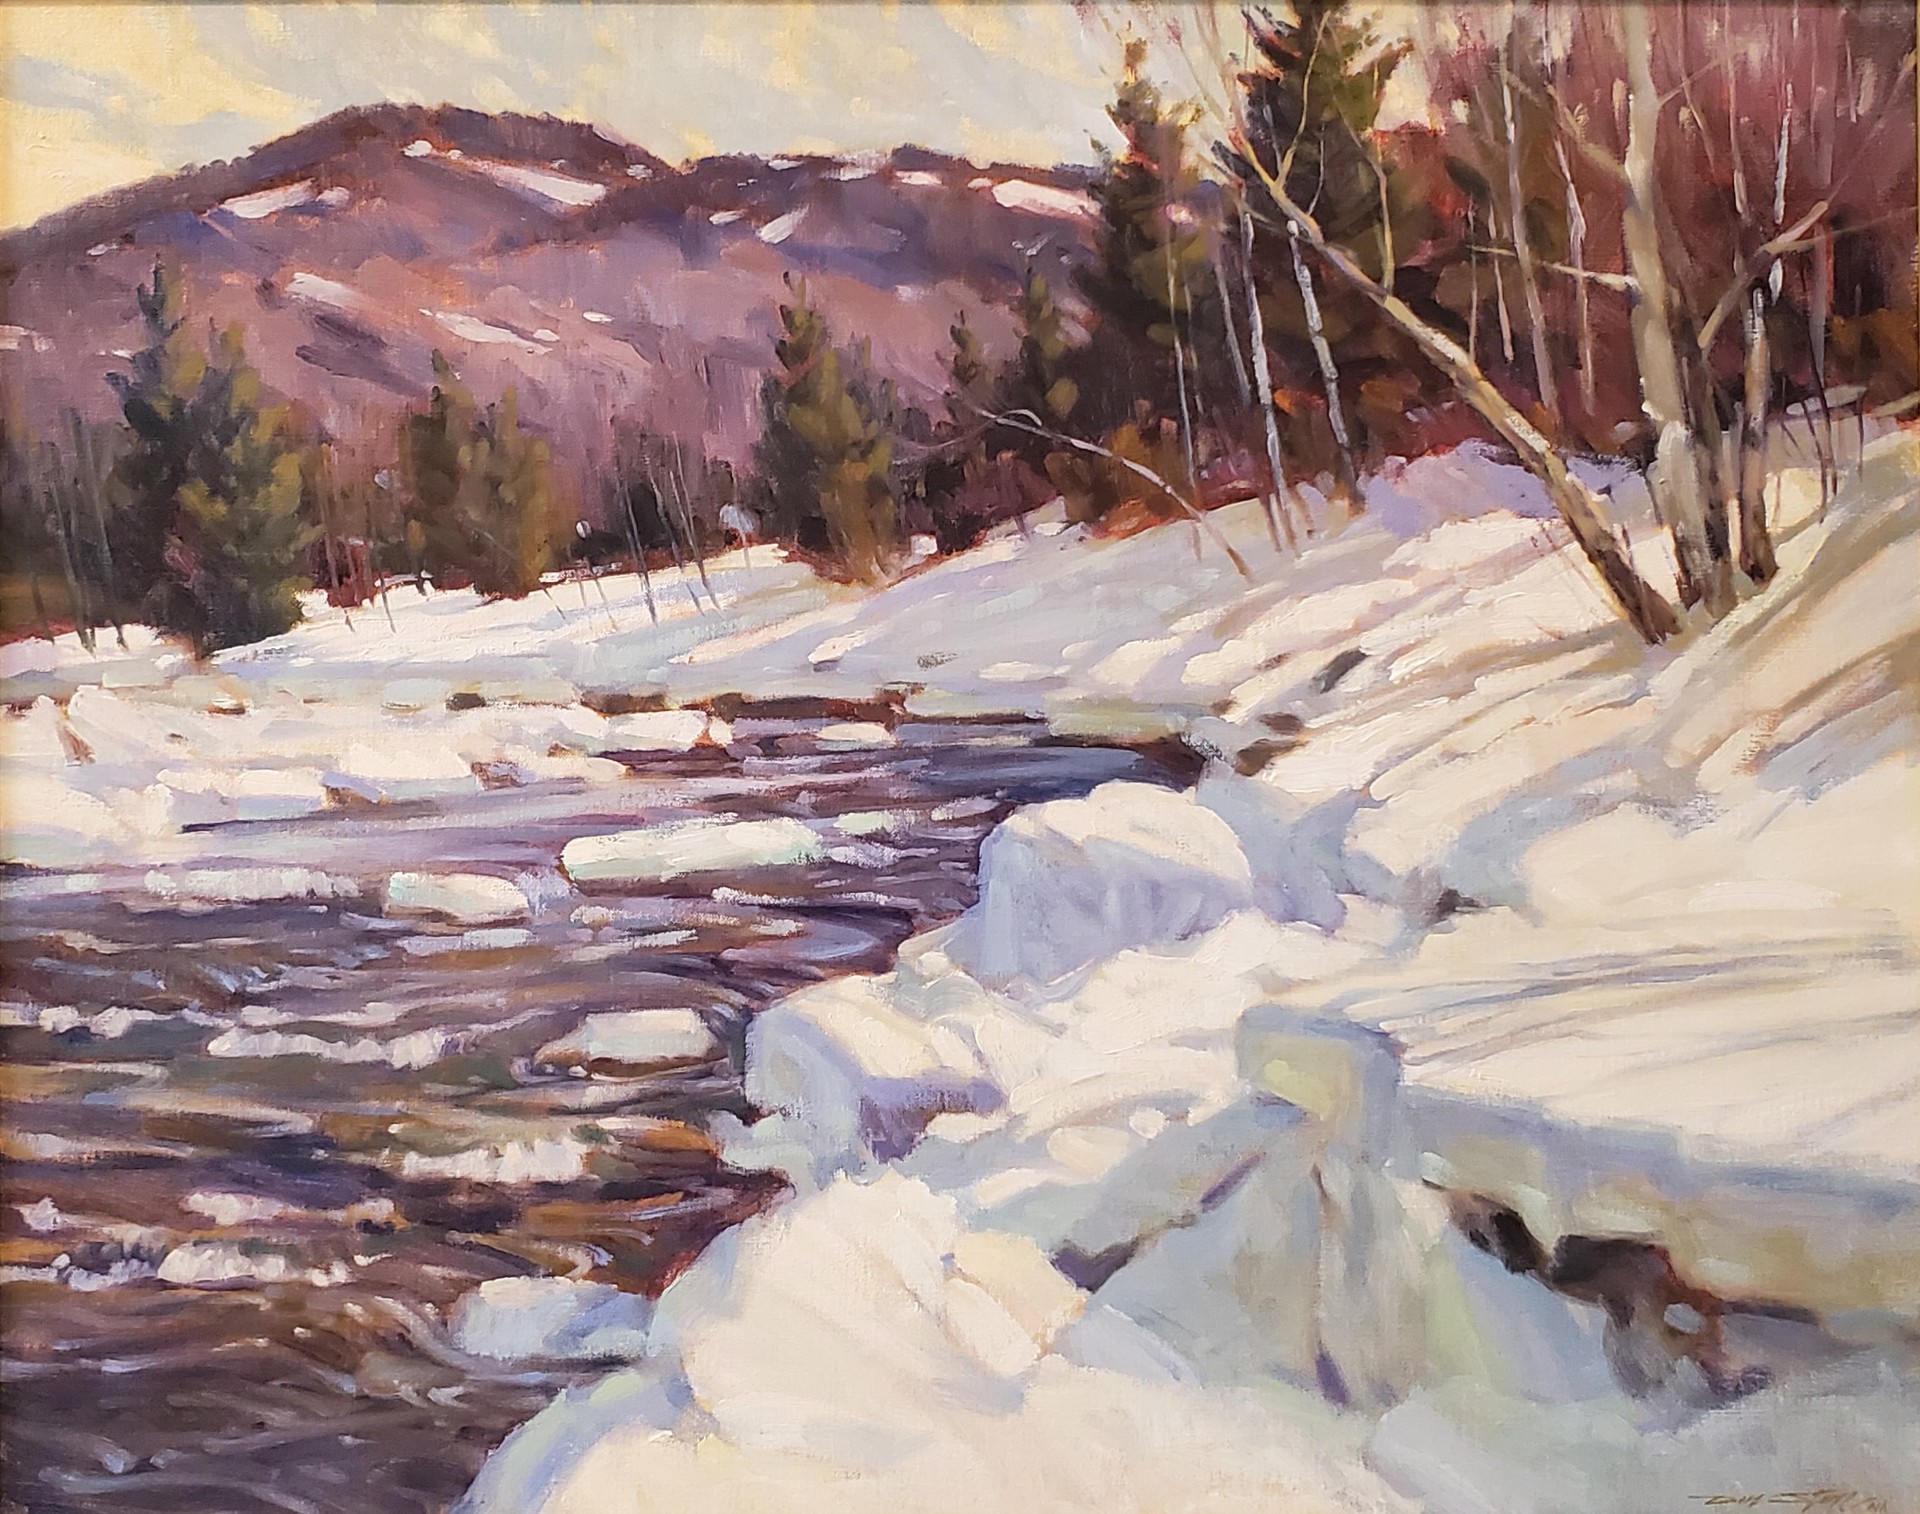 Spring Thaw by Don Stone (1929-2015)